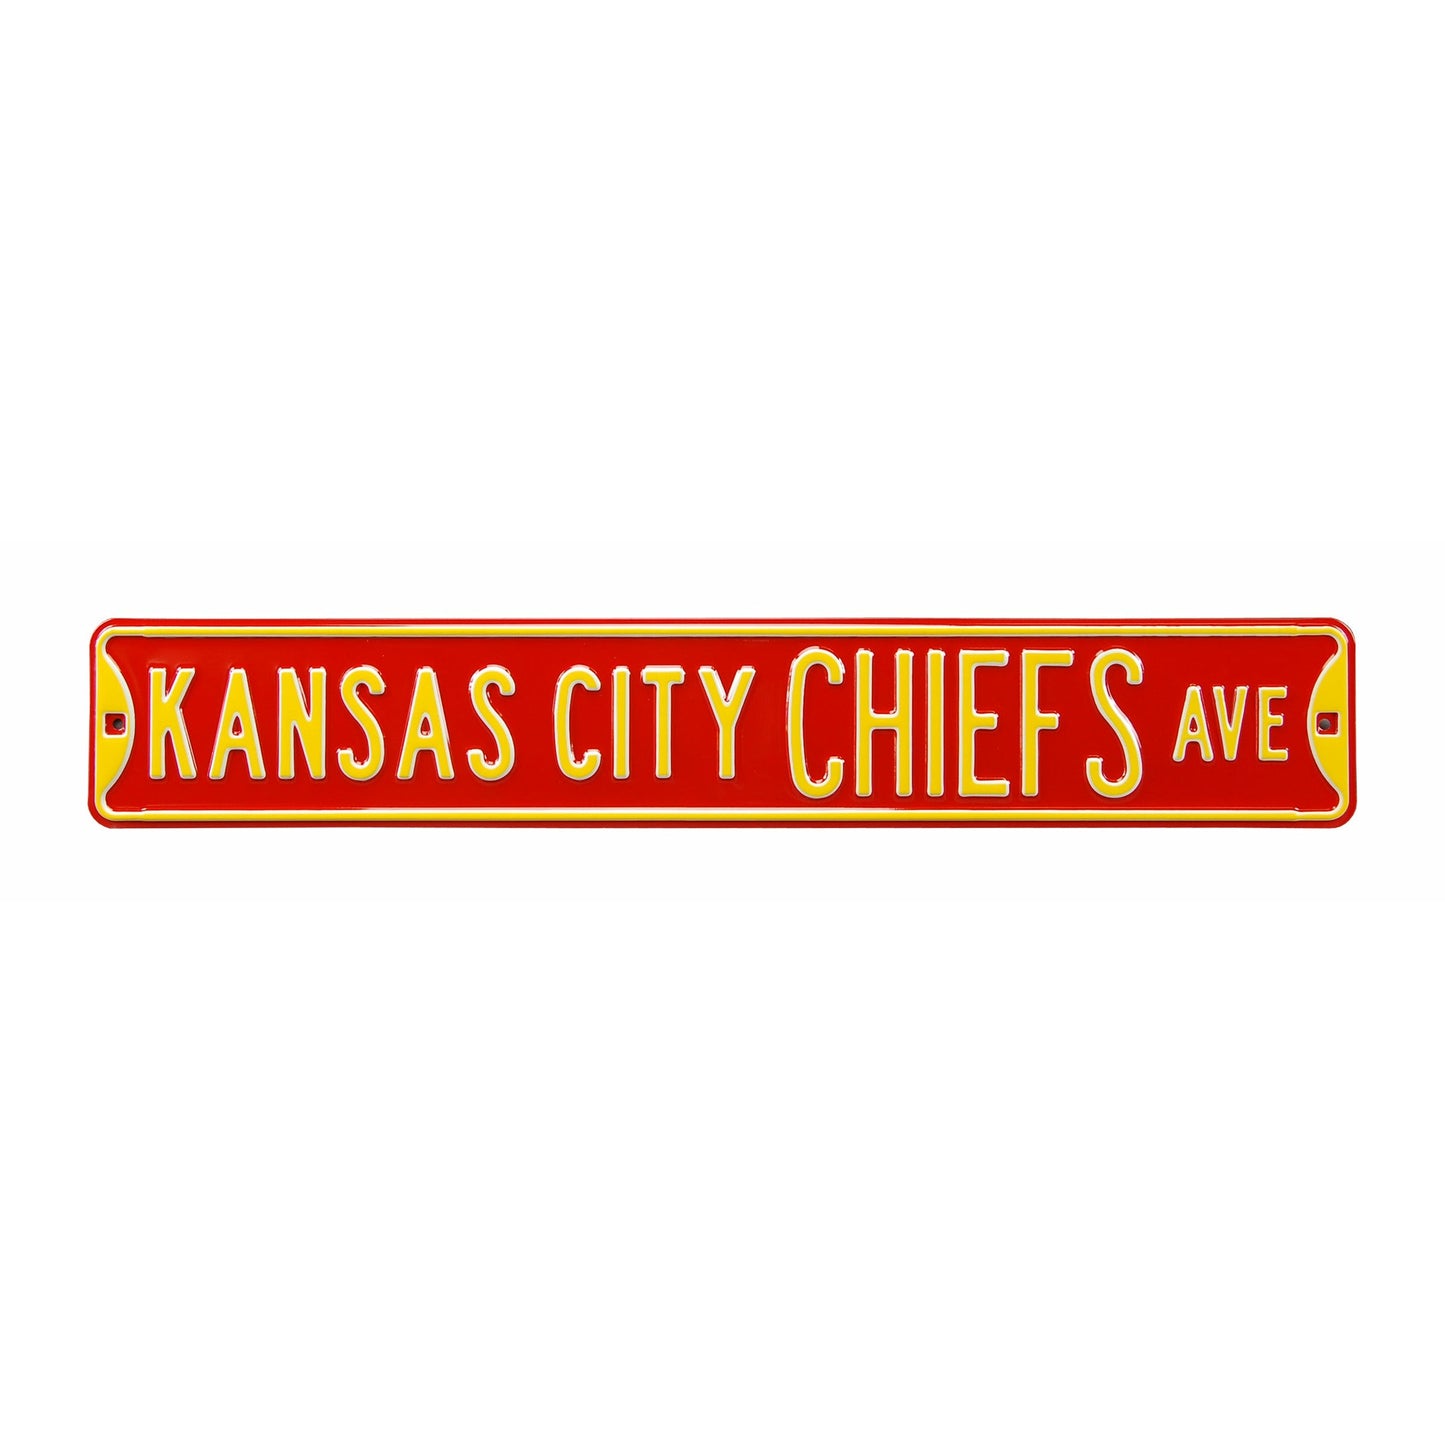 Kansas City Chiefs - CHIEFS AVE - Embossed Steel Street Sign